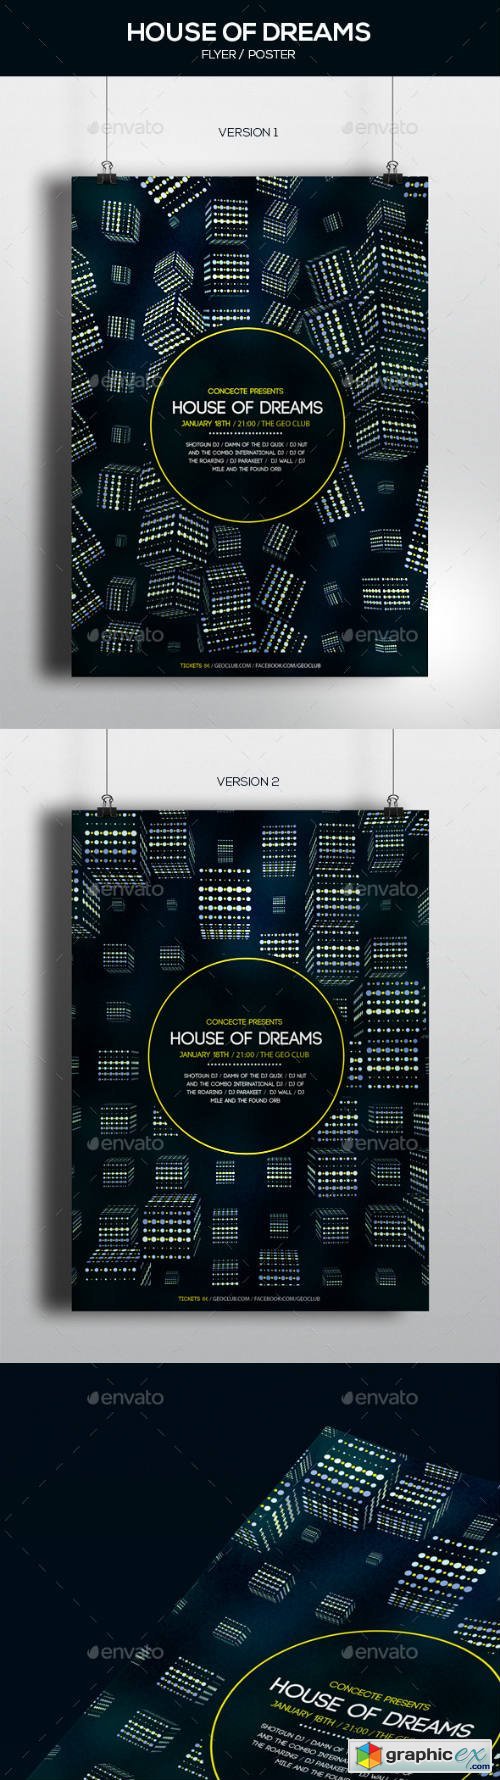 House of Dreams Party Poster / 2 Versions